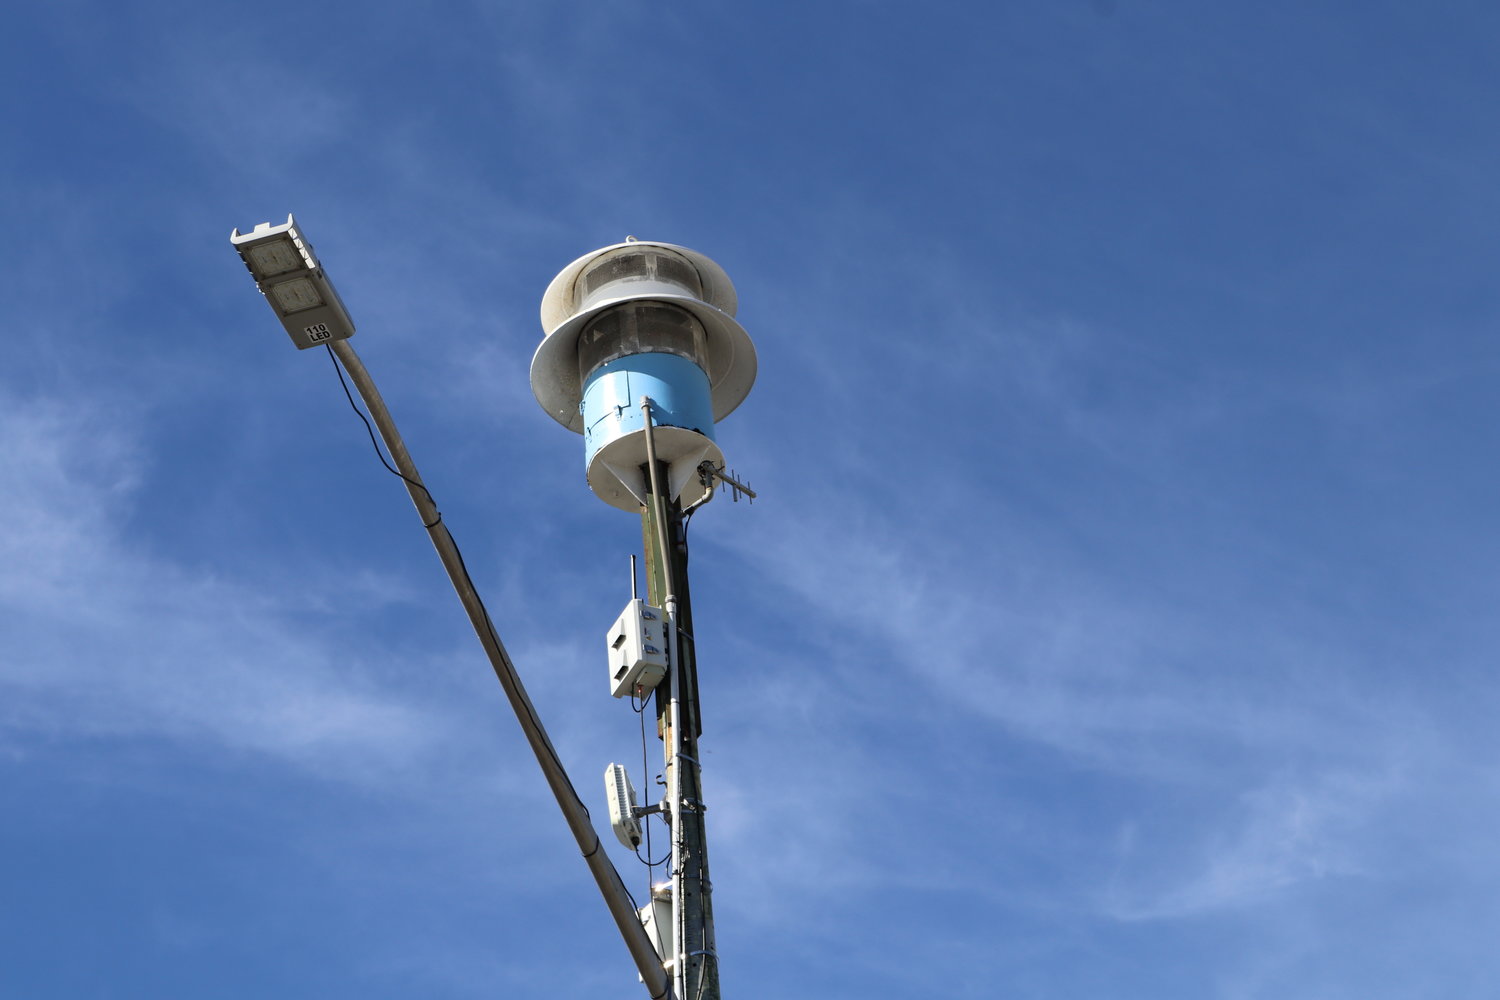 The city of Fairhope is seeking a grant to replace the current downtown weather warning siren with a series of speakers. The siren dates to World War II.